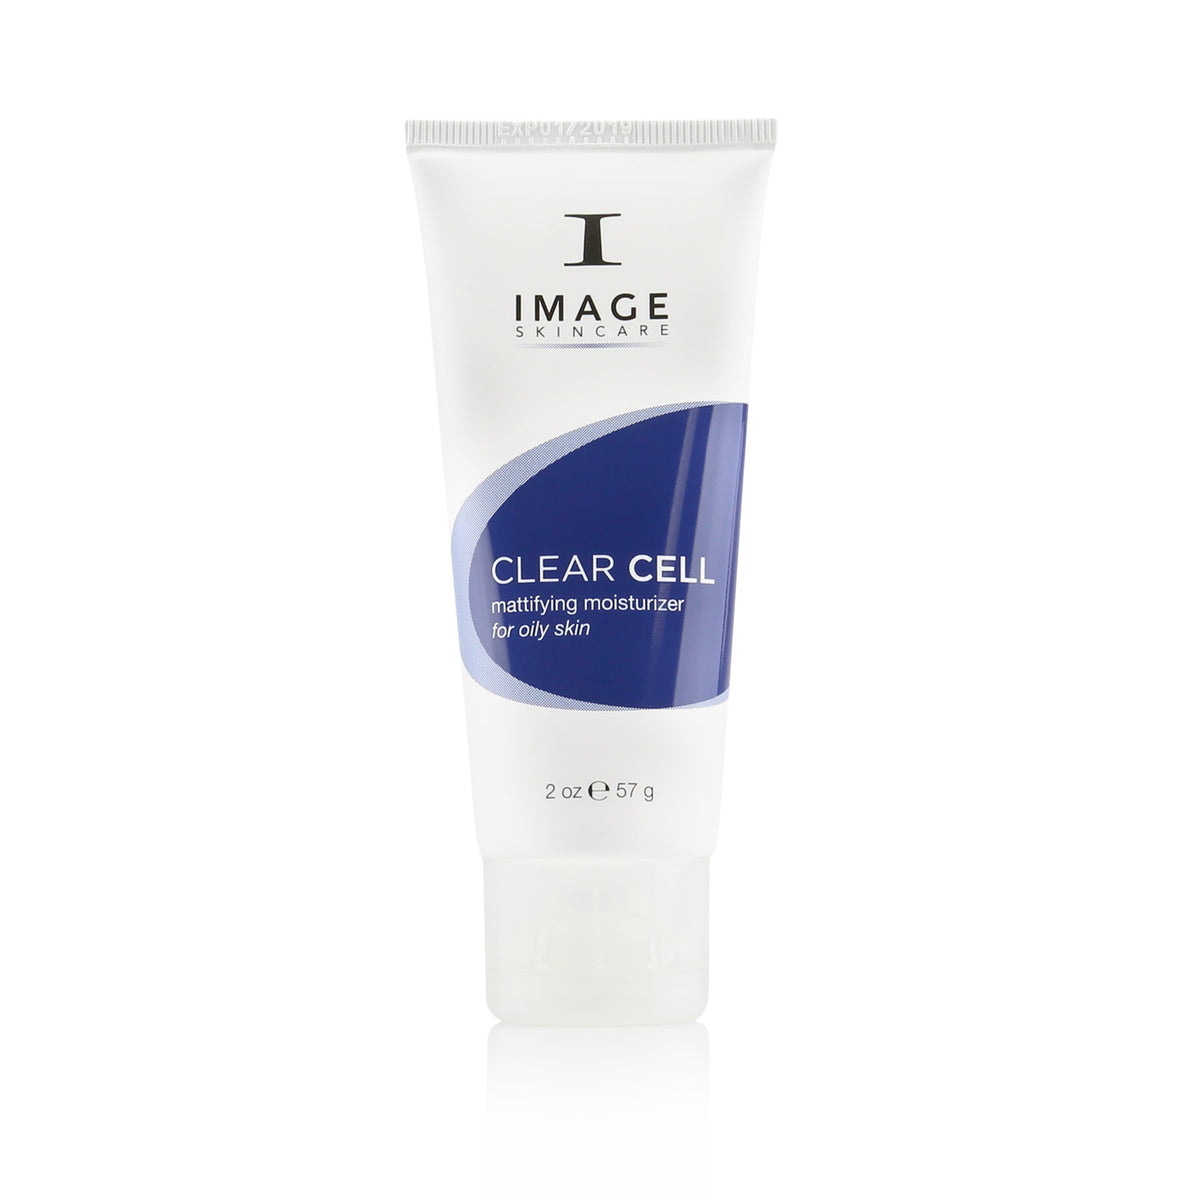 Image Skincare - CLEAR CELL MATTIFYING MOISTURIZER 2OZ